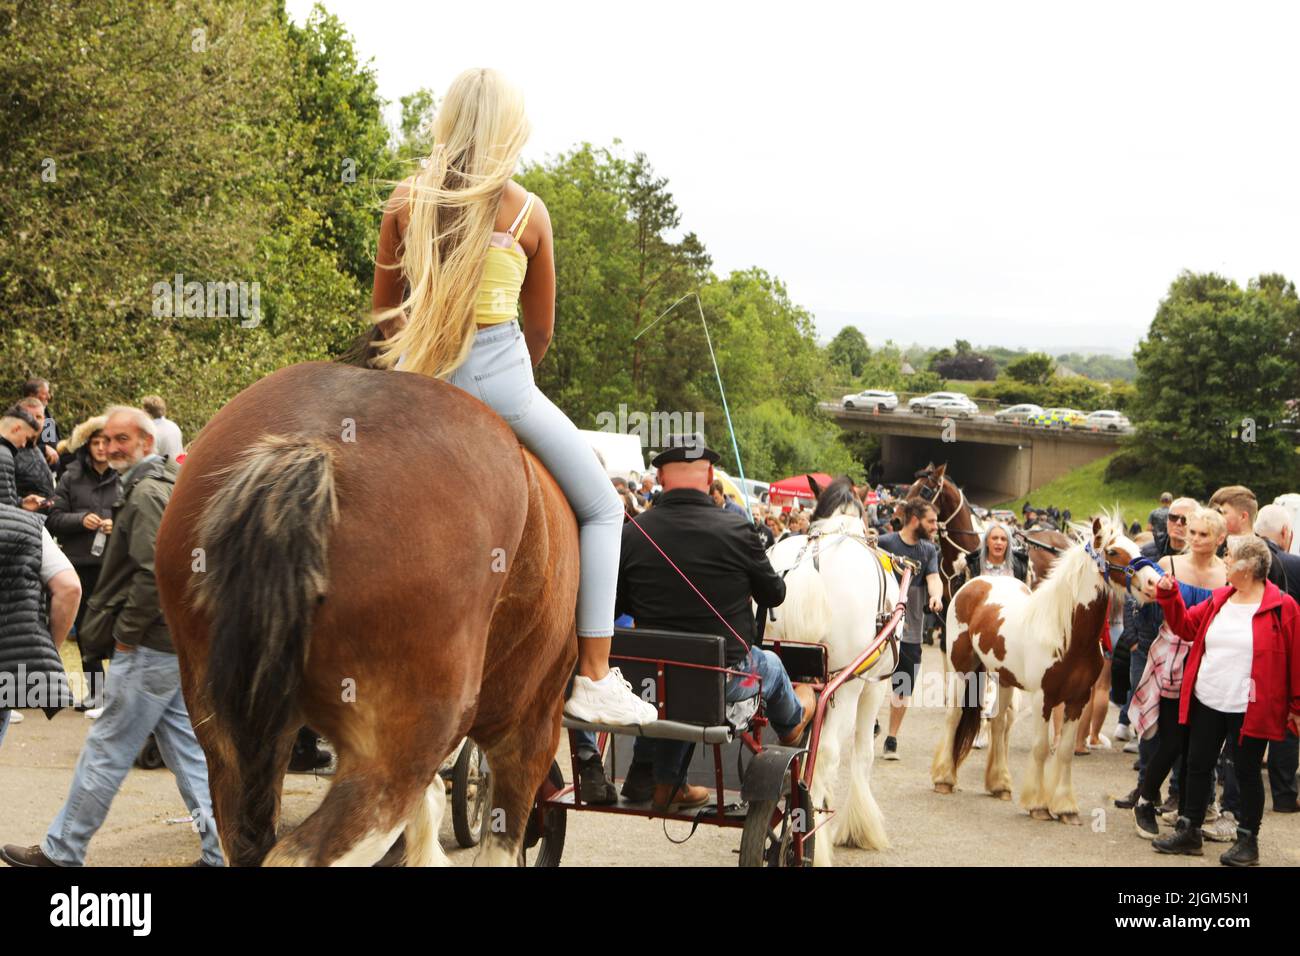 A young woman with long blonde hair riding a shire horse along the road.. Appleby Horse Fair, Appleby in Westmorland, Cumbria, England, United Kingdom Stock Photo